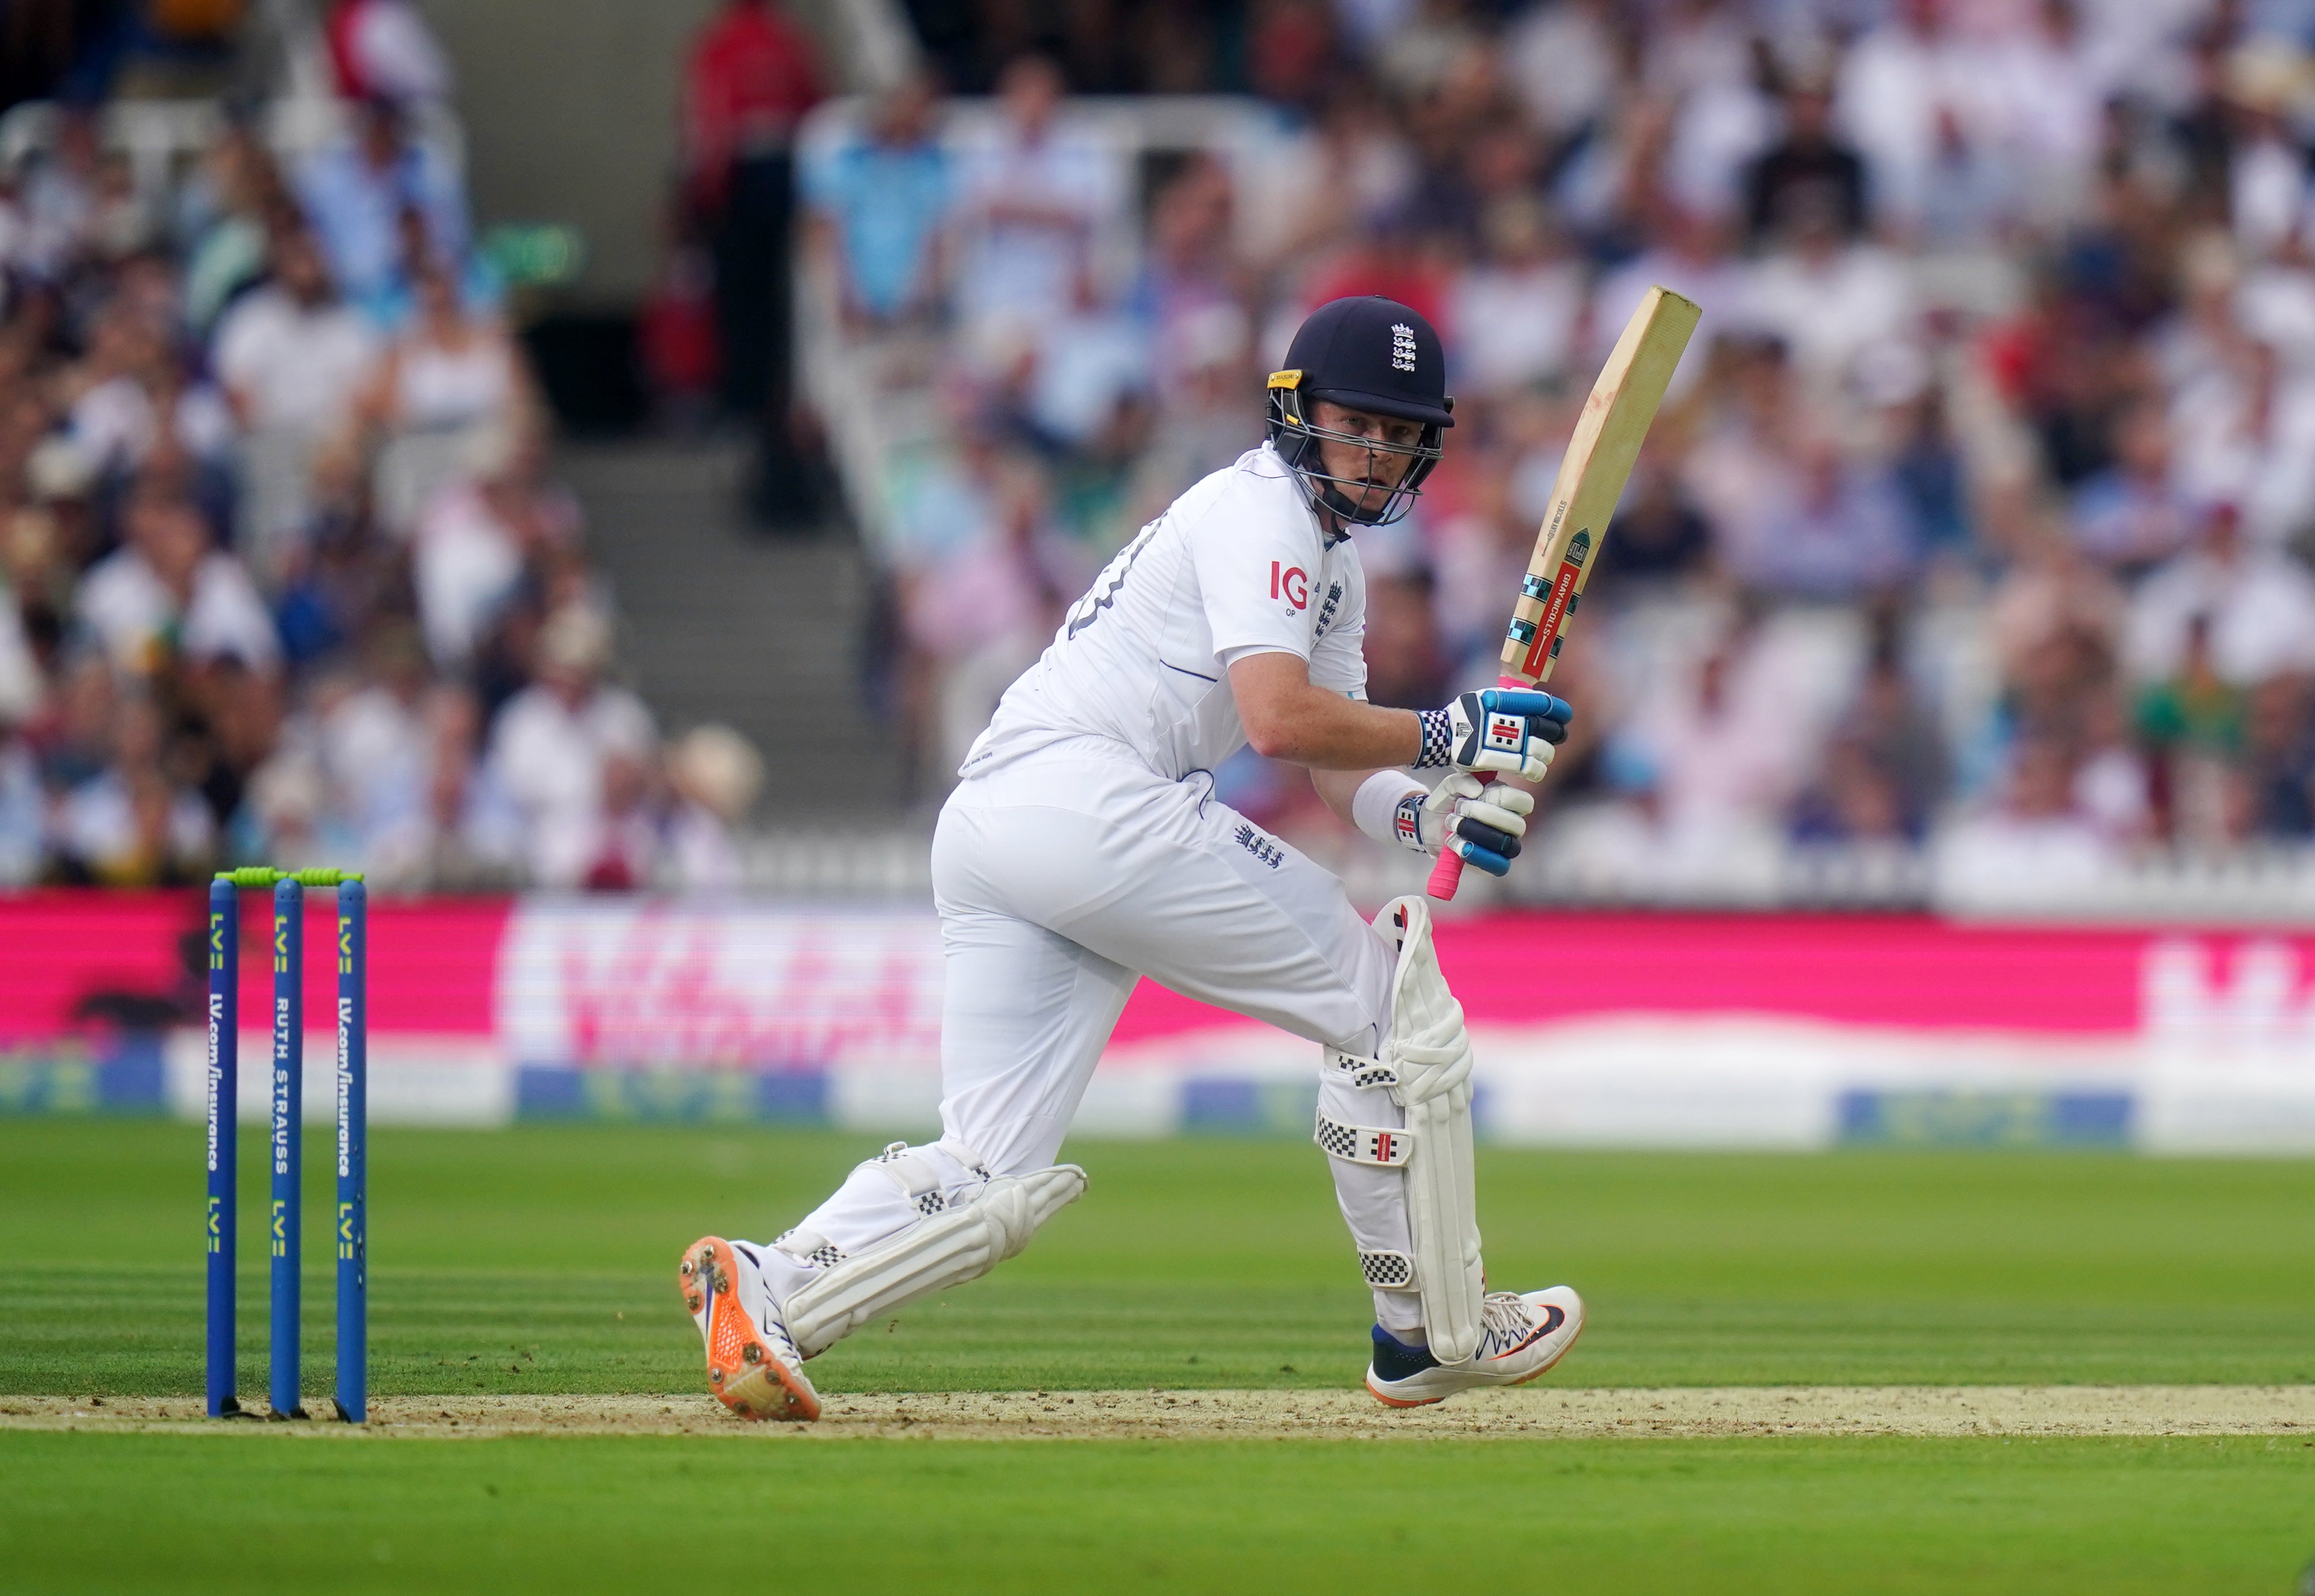 Ollie Pope offered England’s only resistance at Lord’s (Adam Davy/PA)